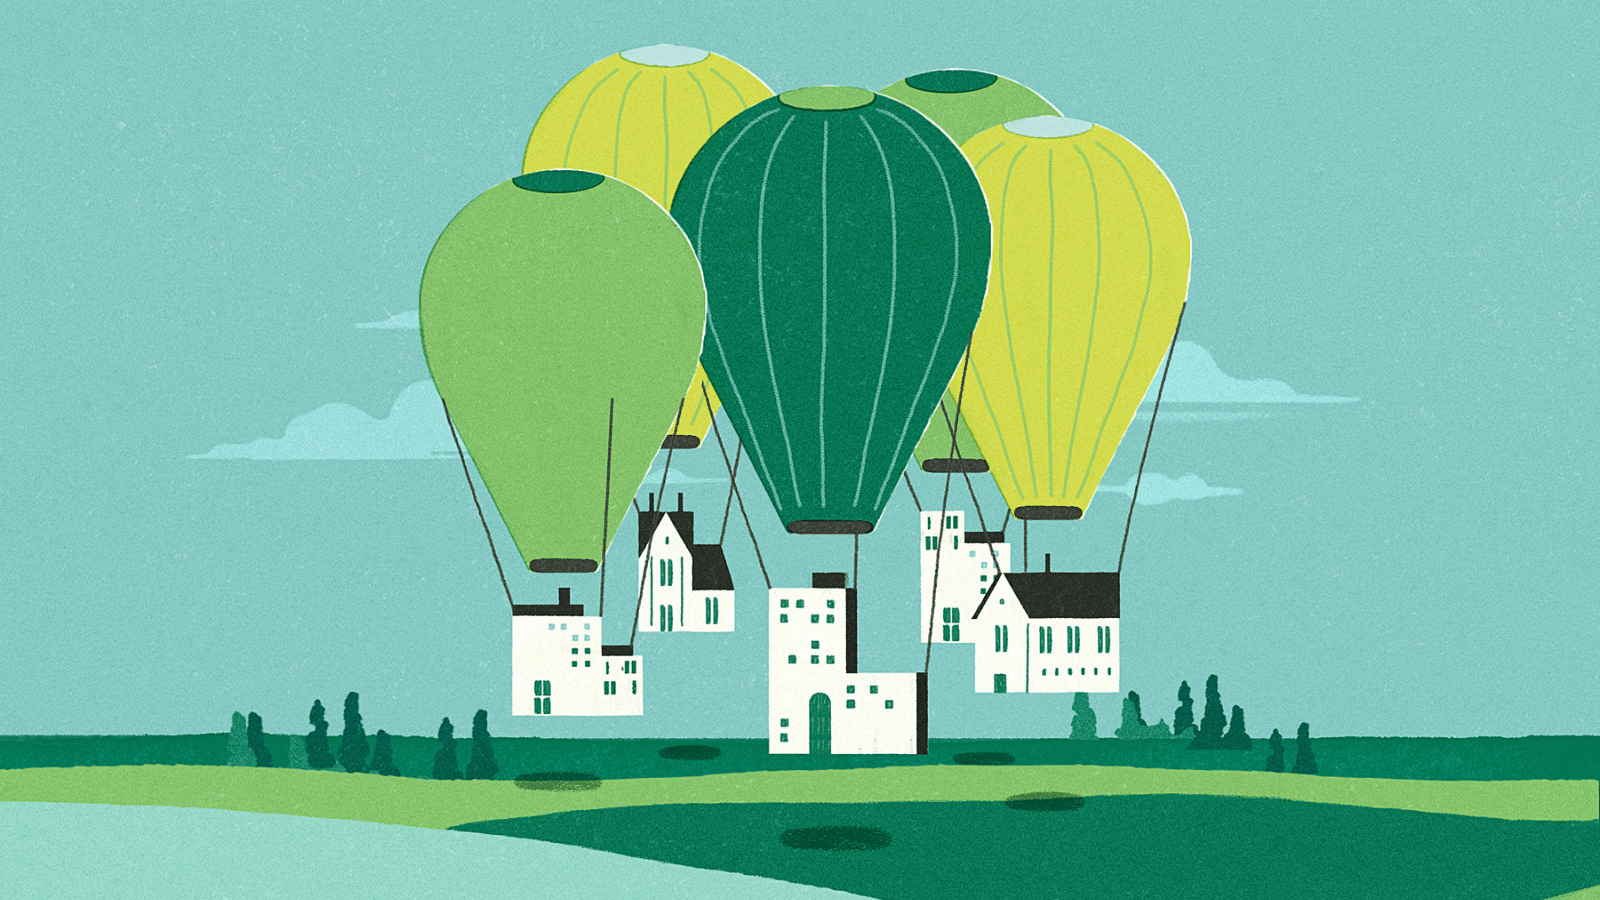 A stylized illustration of four enormous balloons carrying 4 white houses over a hilly landscape in front of a blue sky